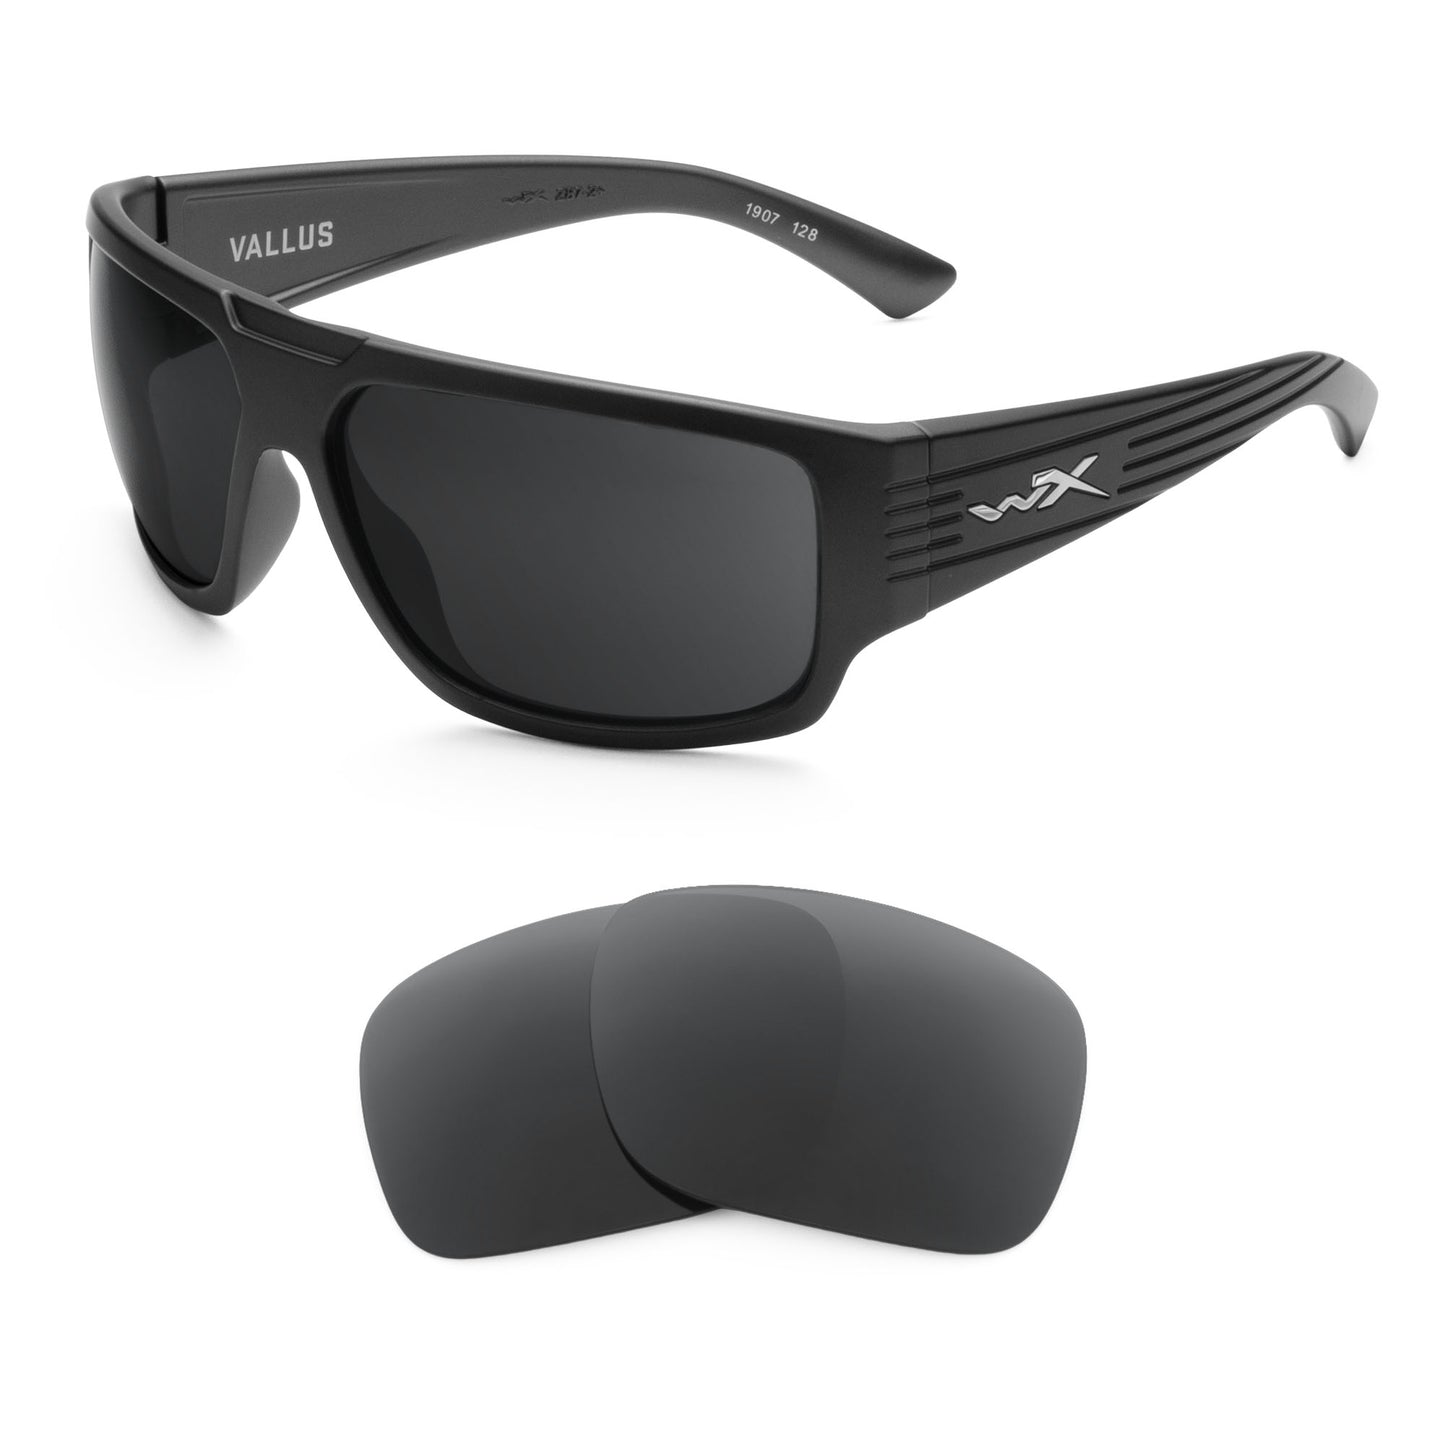 Wiley X Vallus sunglasses with replacement lenses